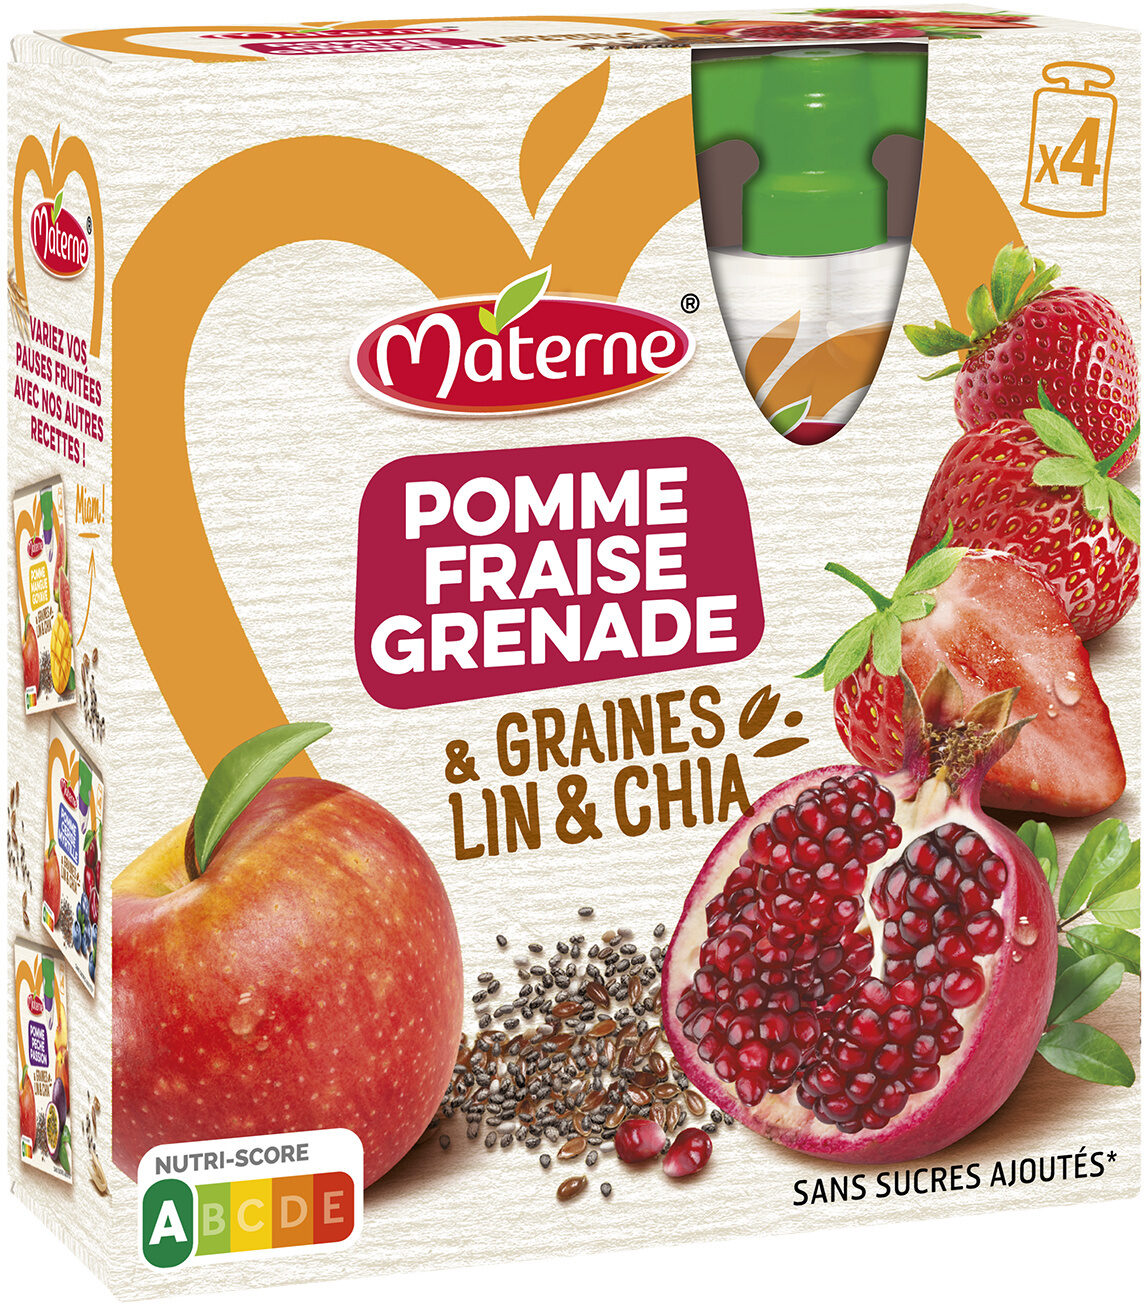 MATERNE Compotes Graines Lin&Chia Pomme Fraise Grenade 4x90g - Product - fr